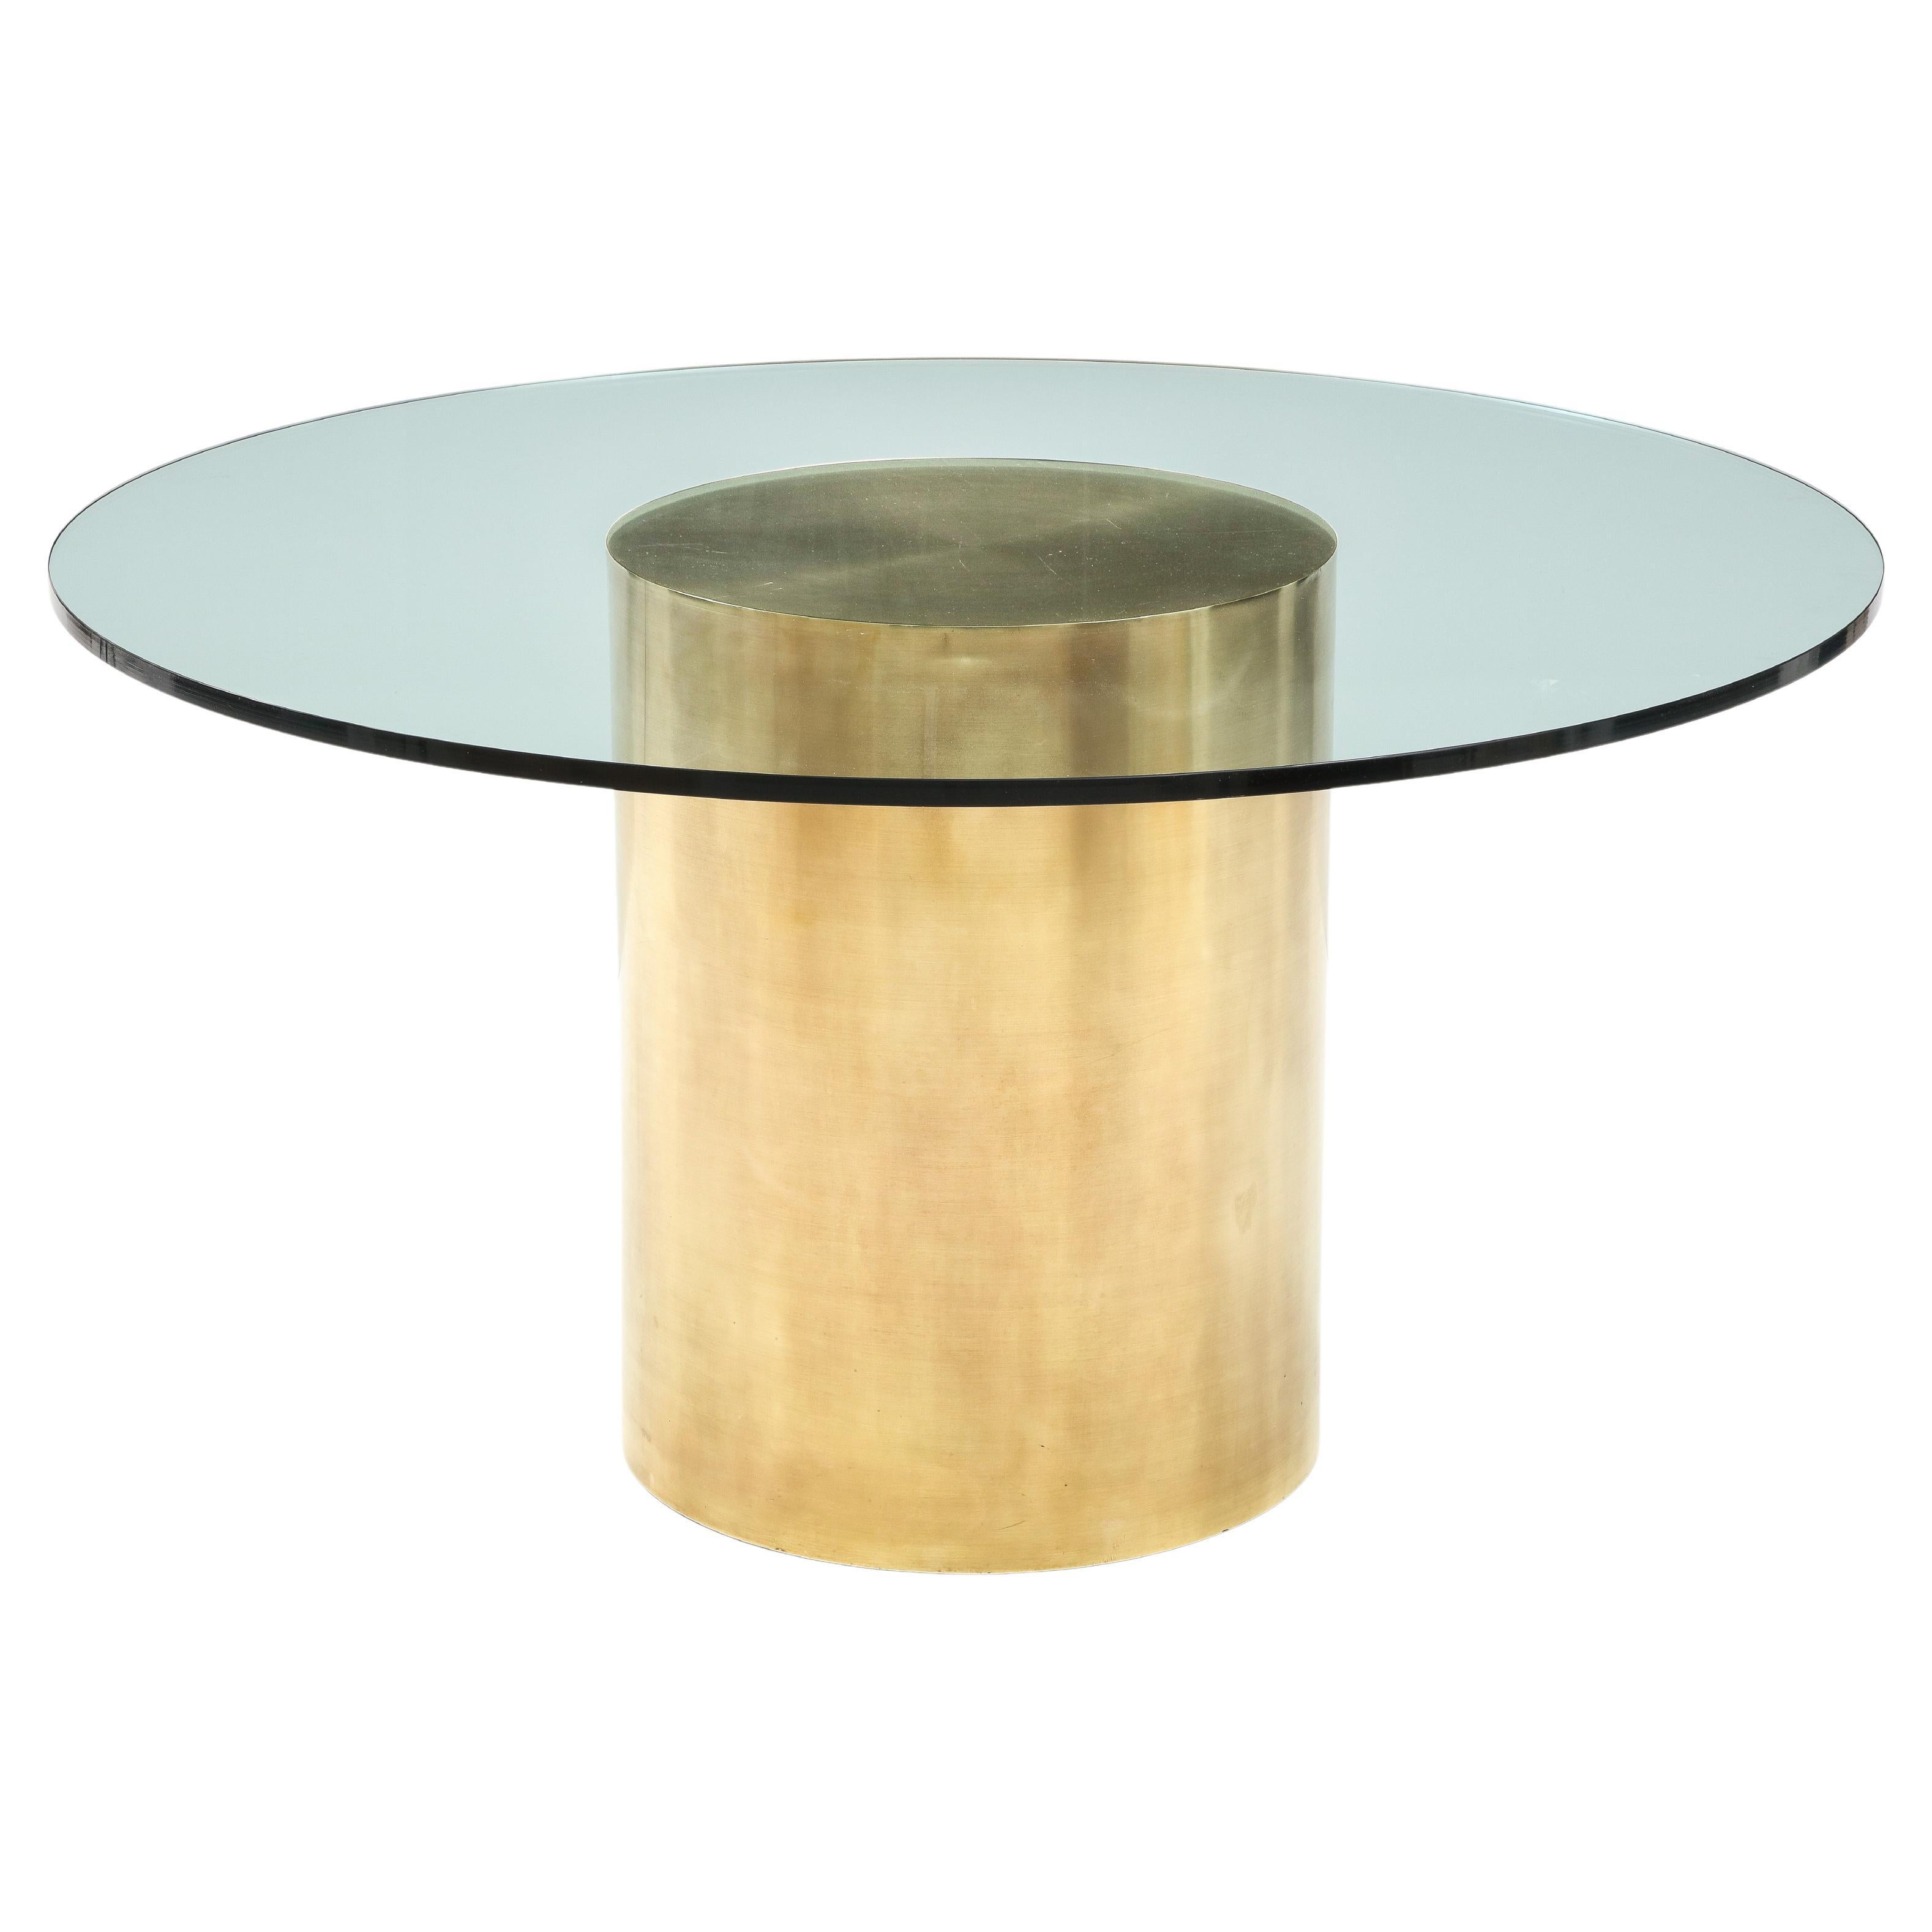 1970's Mid-Century Modern Brass Drum Dining Table Attributed To Brueton For Sale